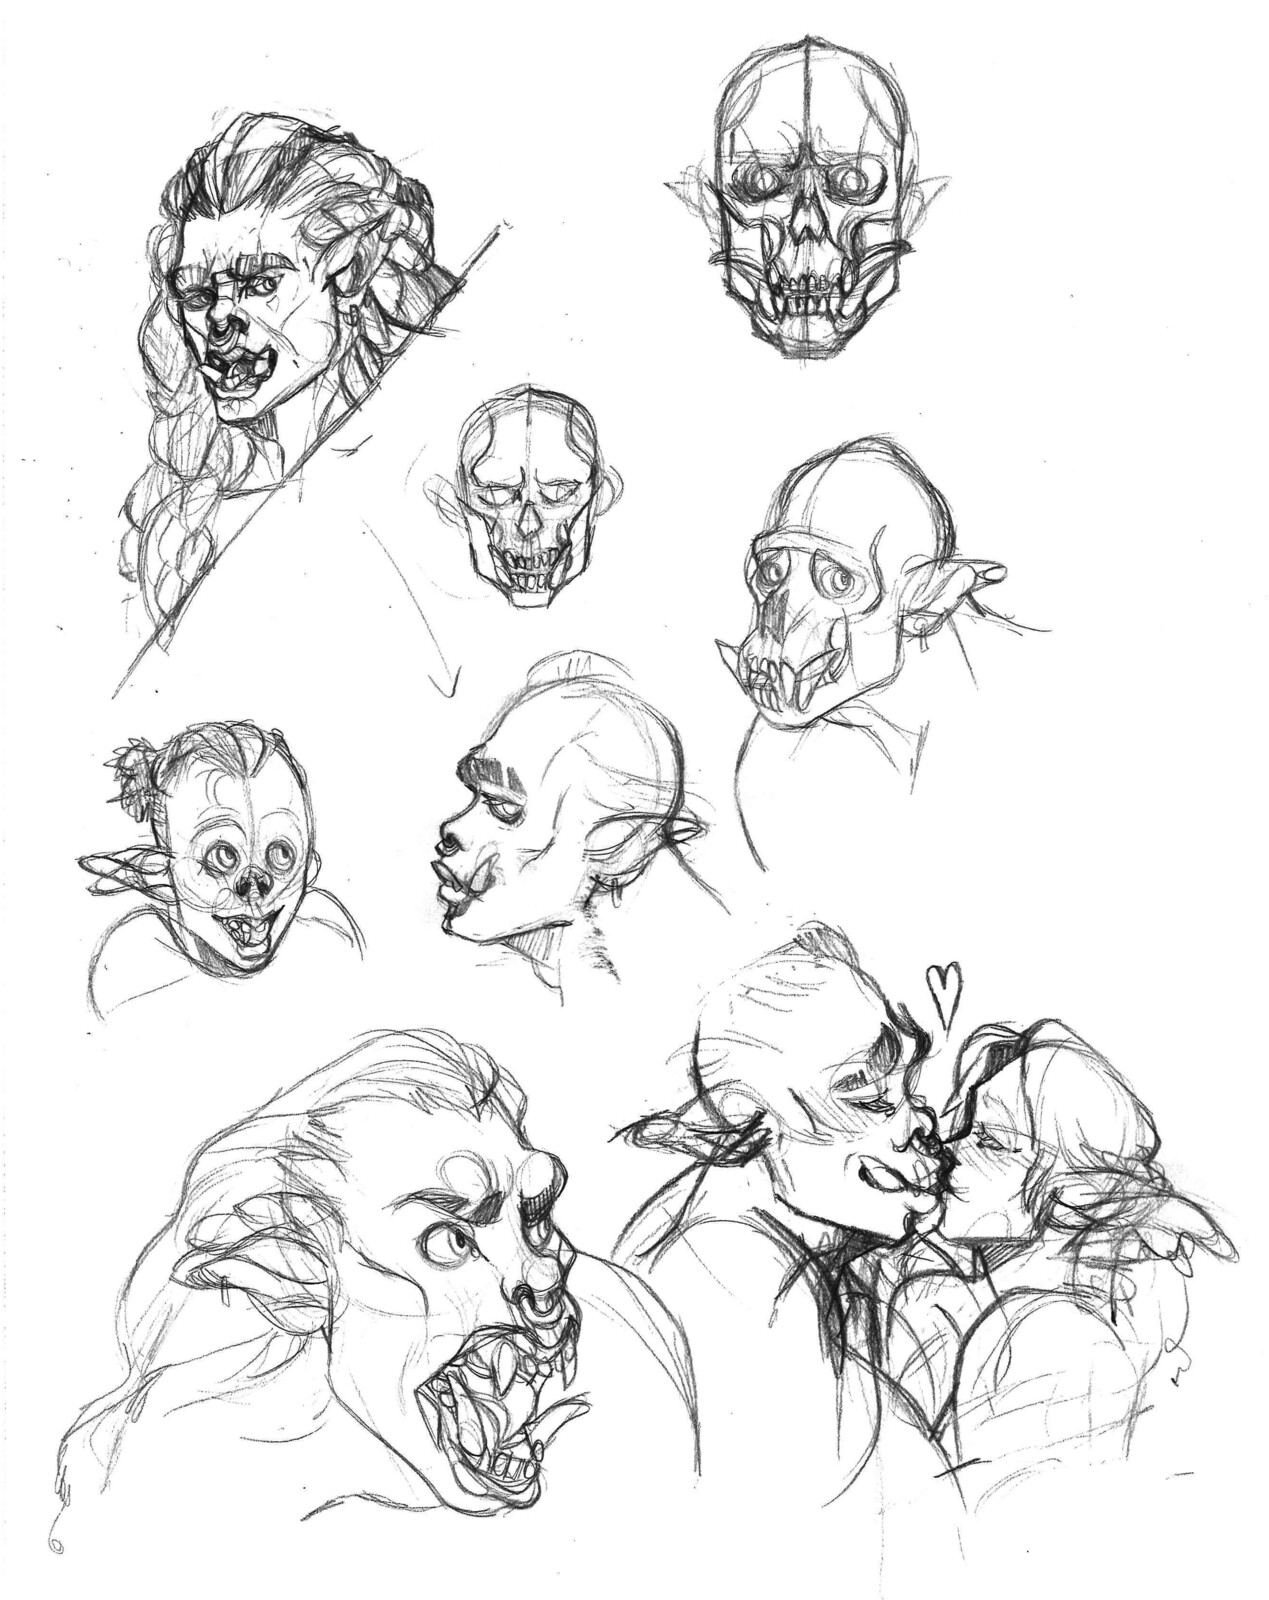 sketchpage showing how I figured out some orc facial anatomy. Looking at gorilla skulls helped a great deal in figuring out a humanoid face with all those big teeth!